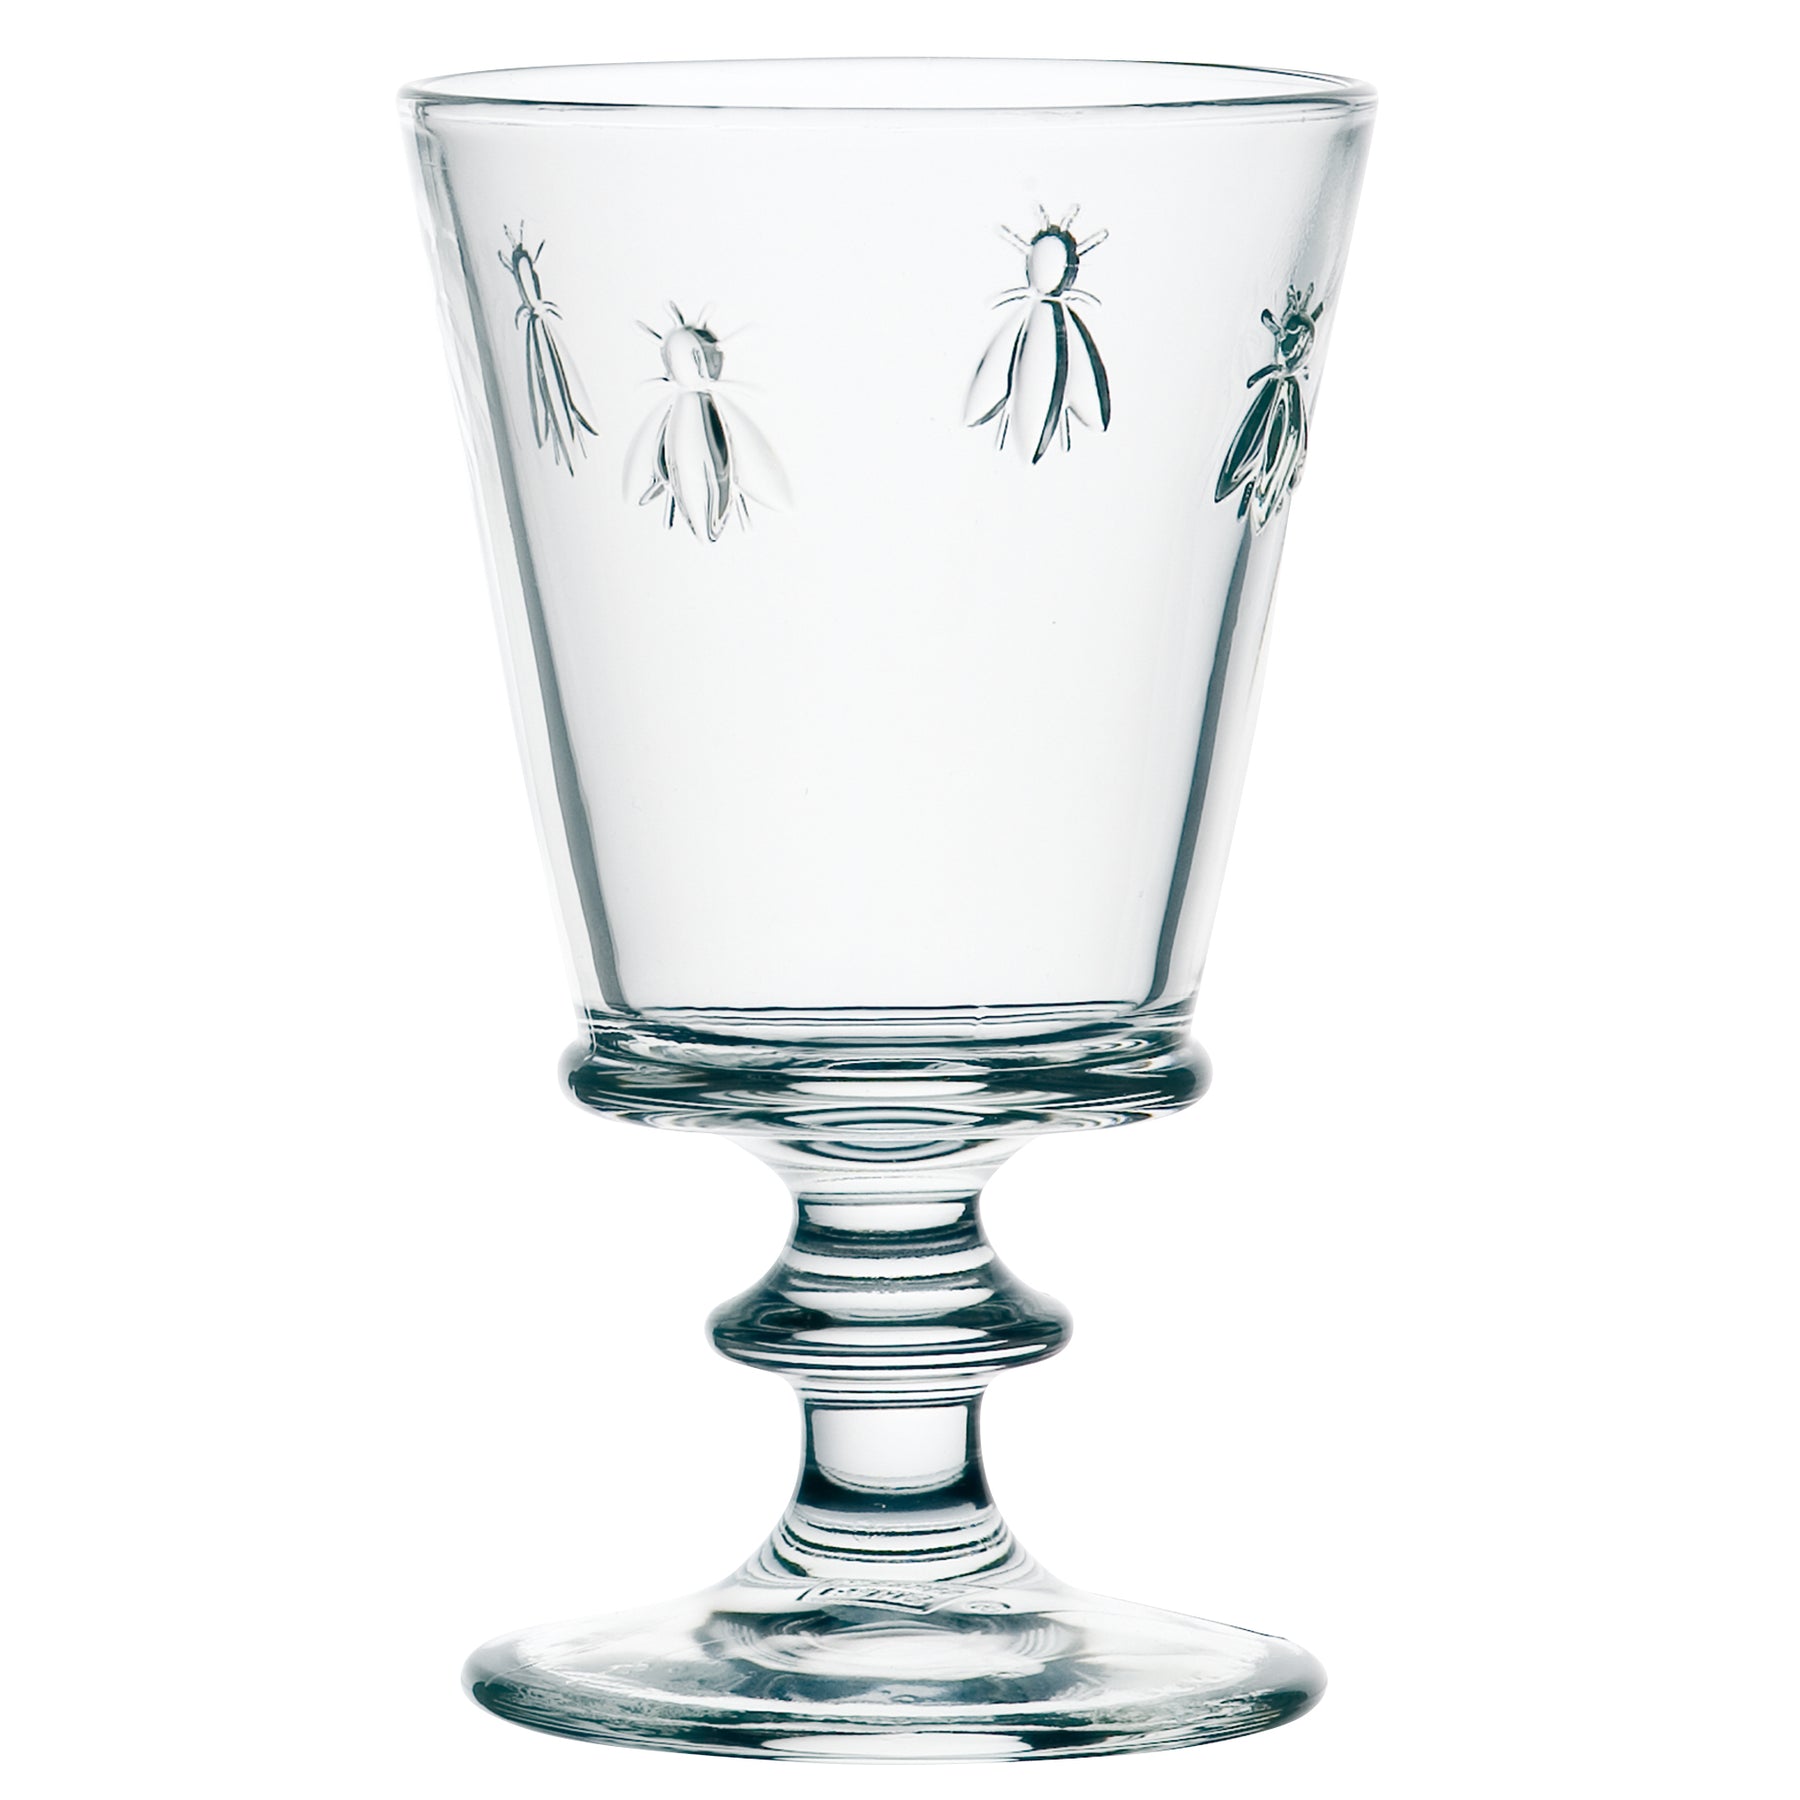 La Rochere Bee Wine Glasses - Set of 6. Made In France! (611001